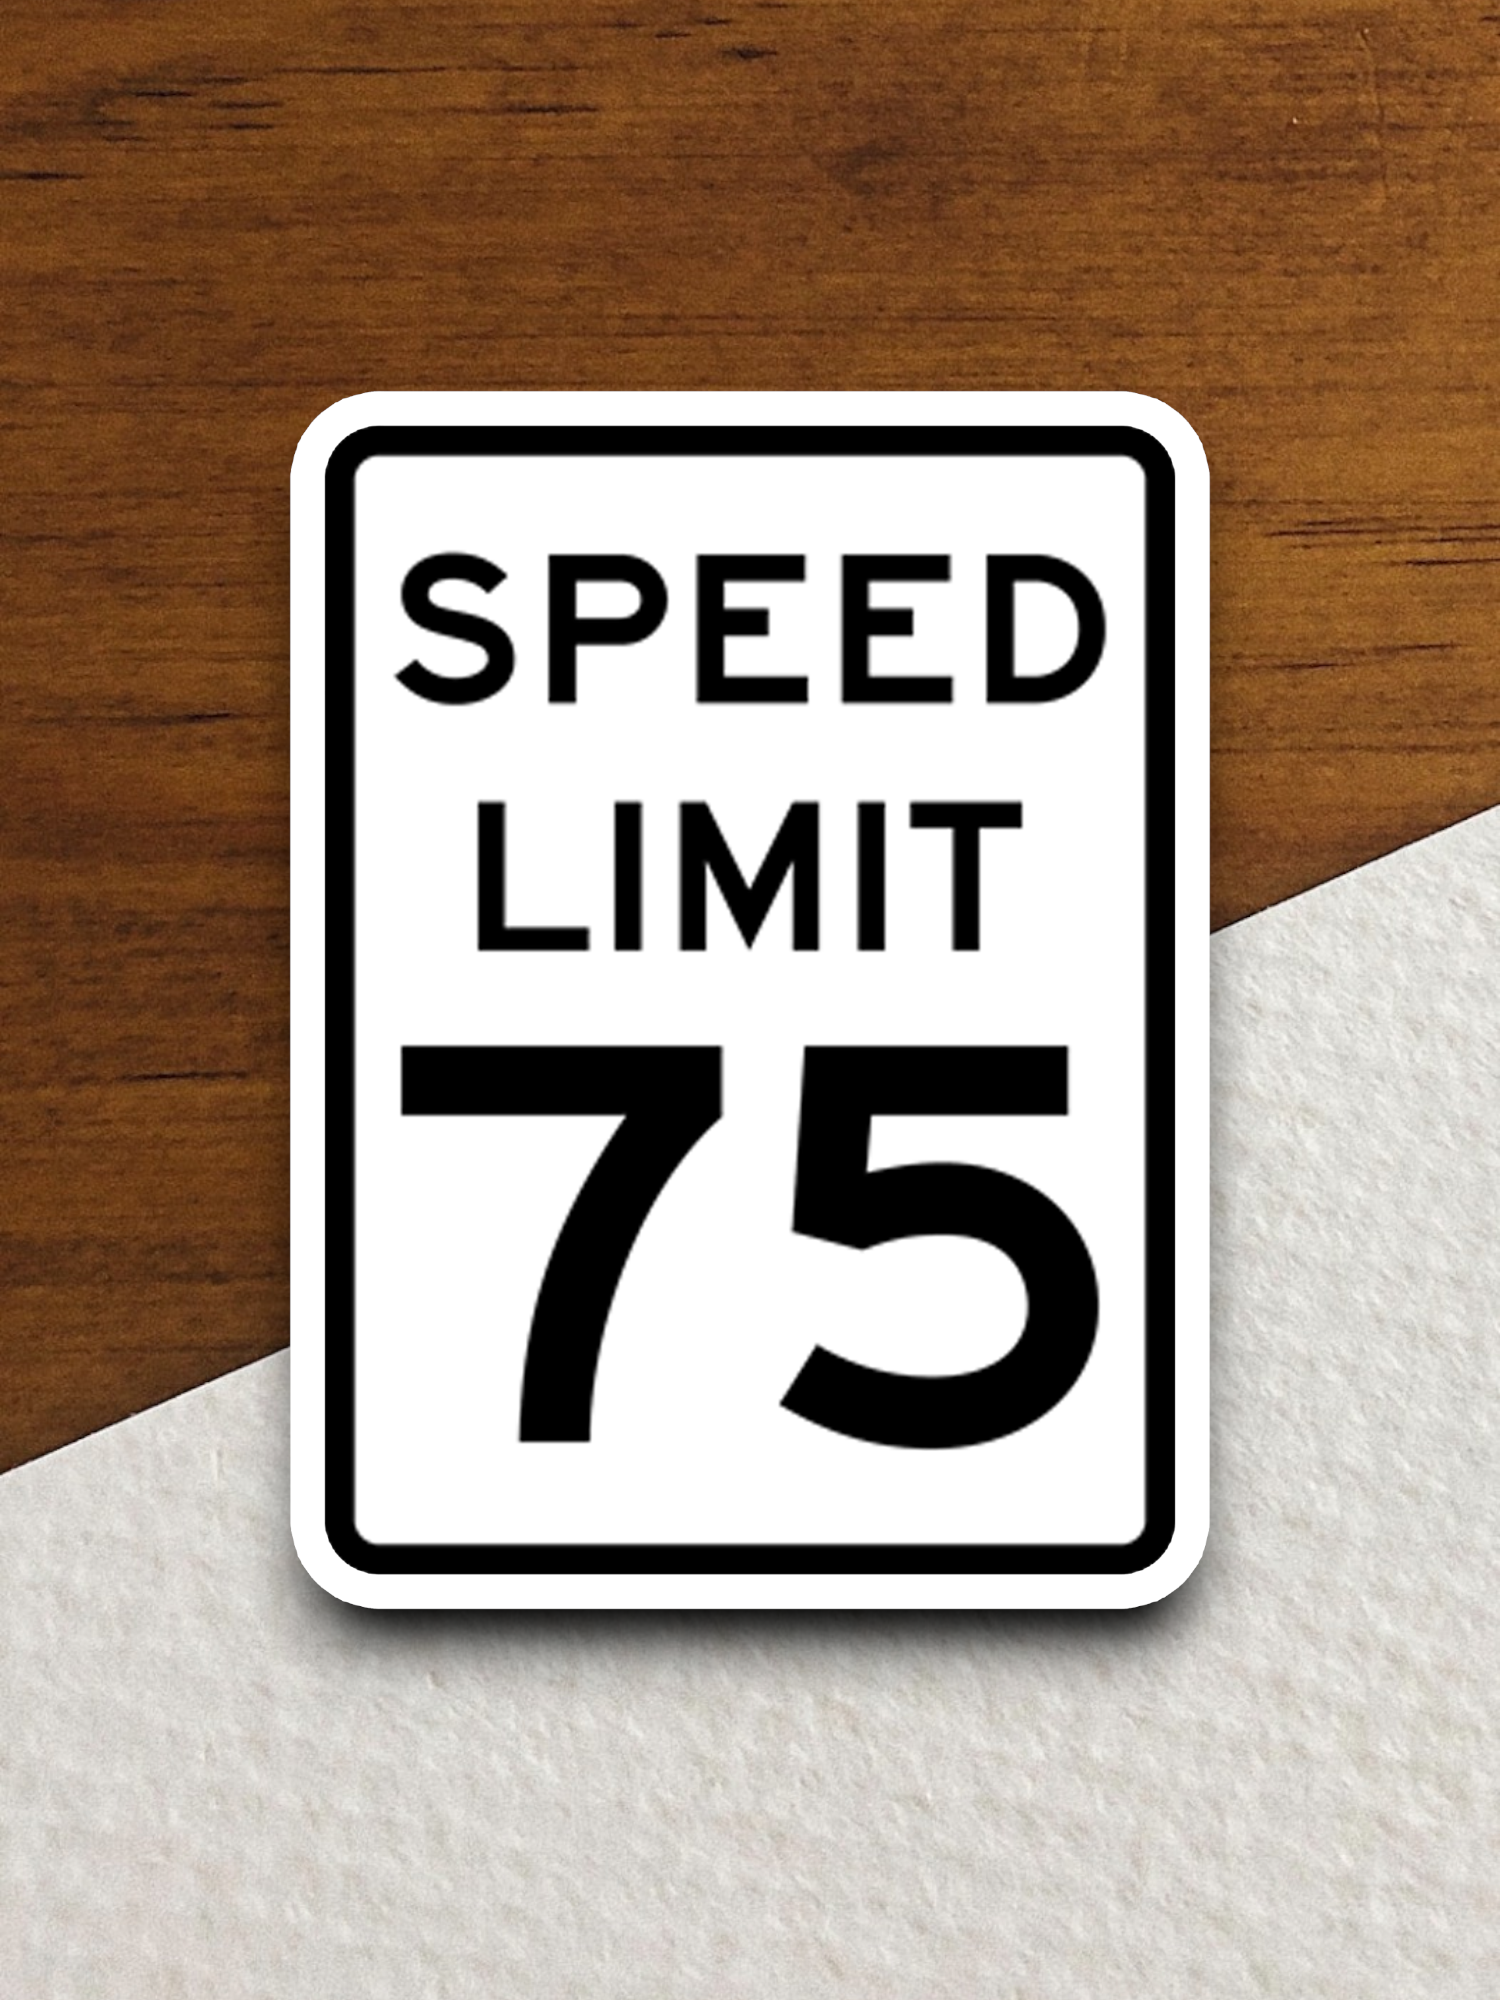 75 Miles Per Hour Speed Limit Road Sign Sticker